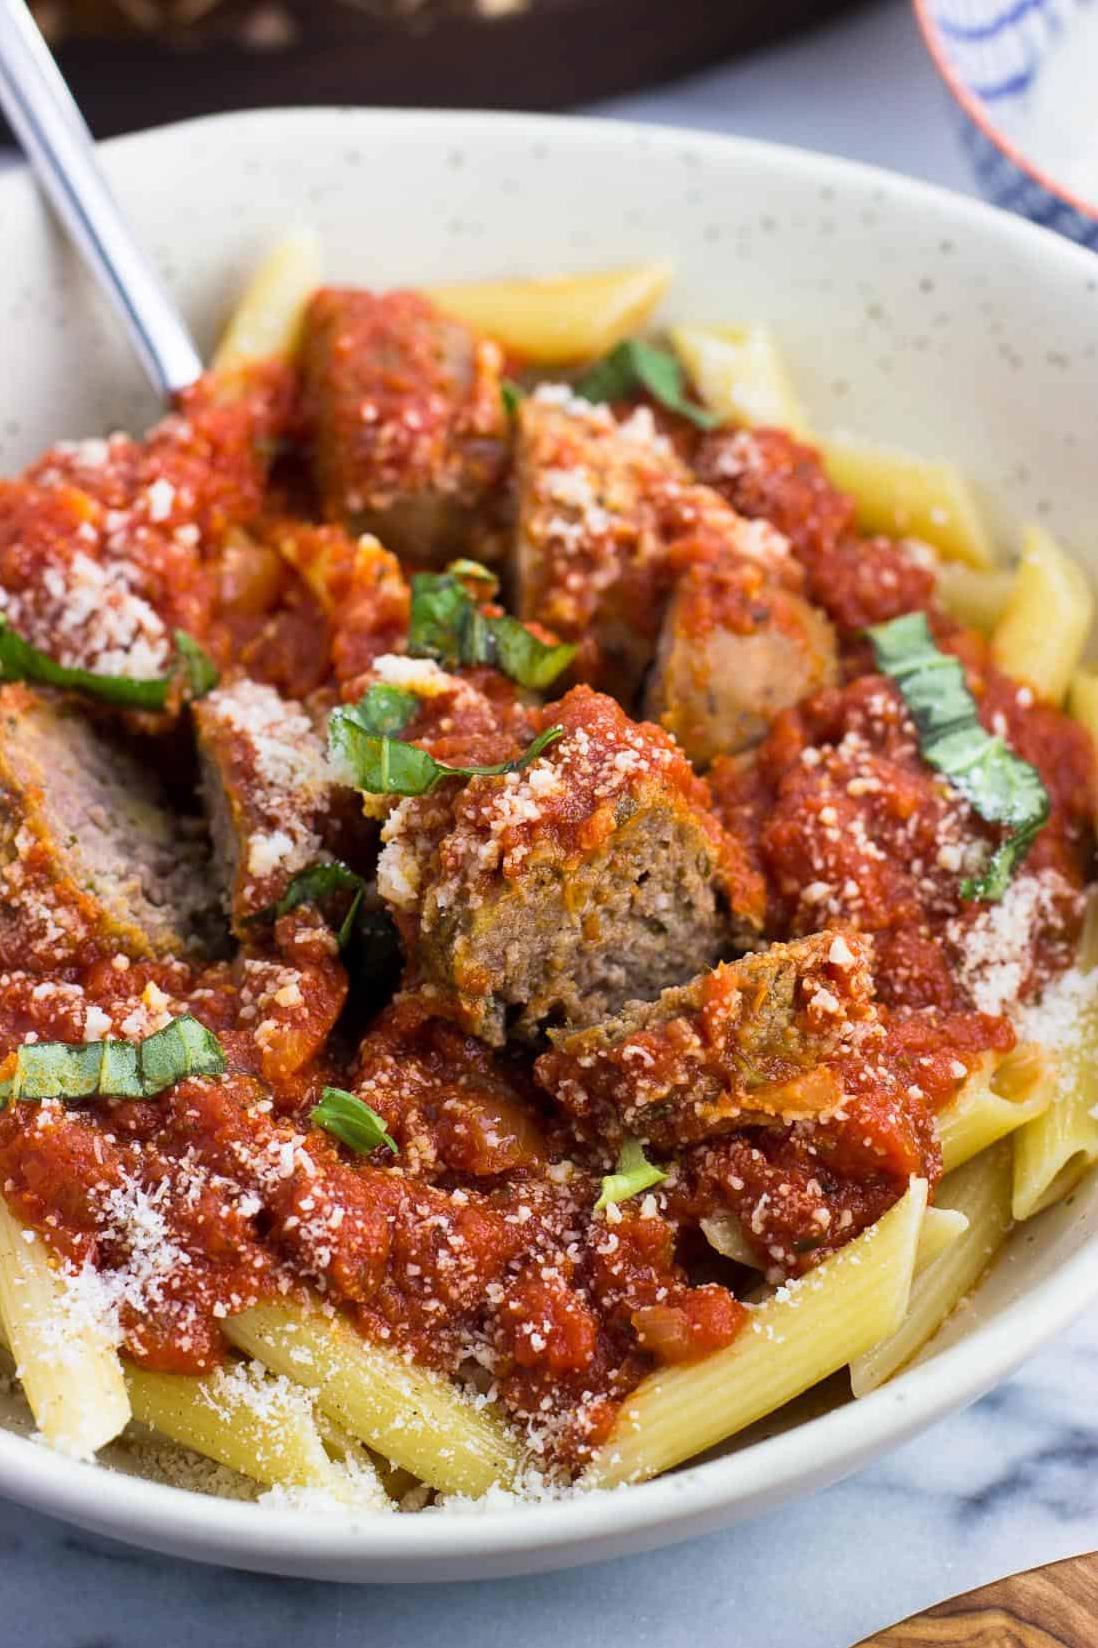  You can't buy happiness, but you can make these meatballs and sausage in Chianti sauce, and that's pretty close